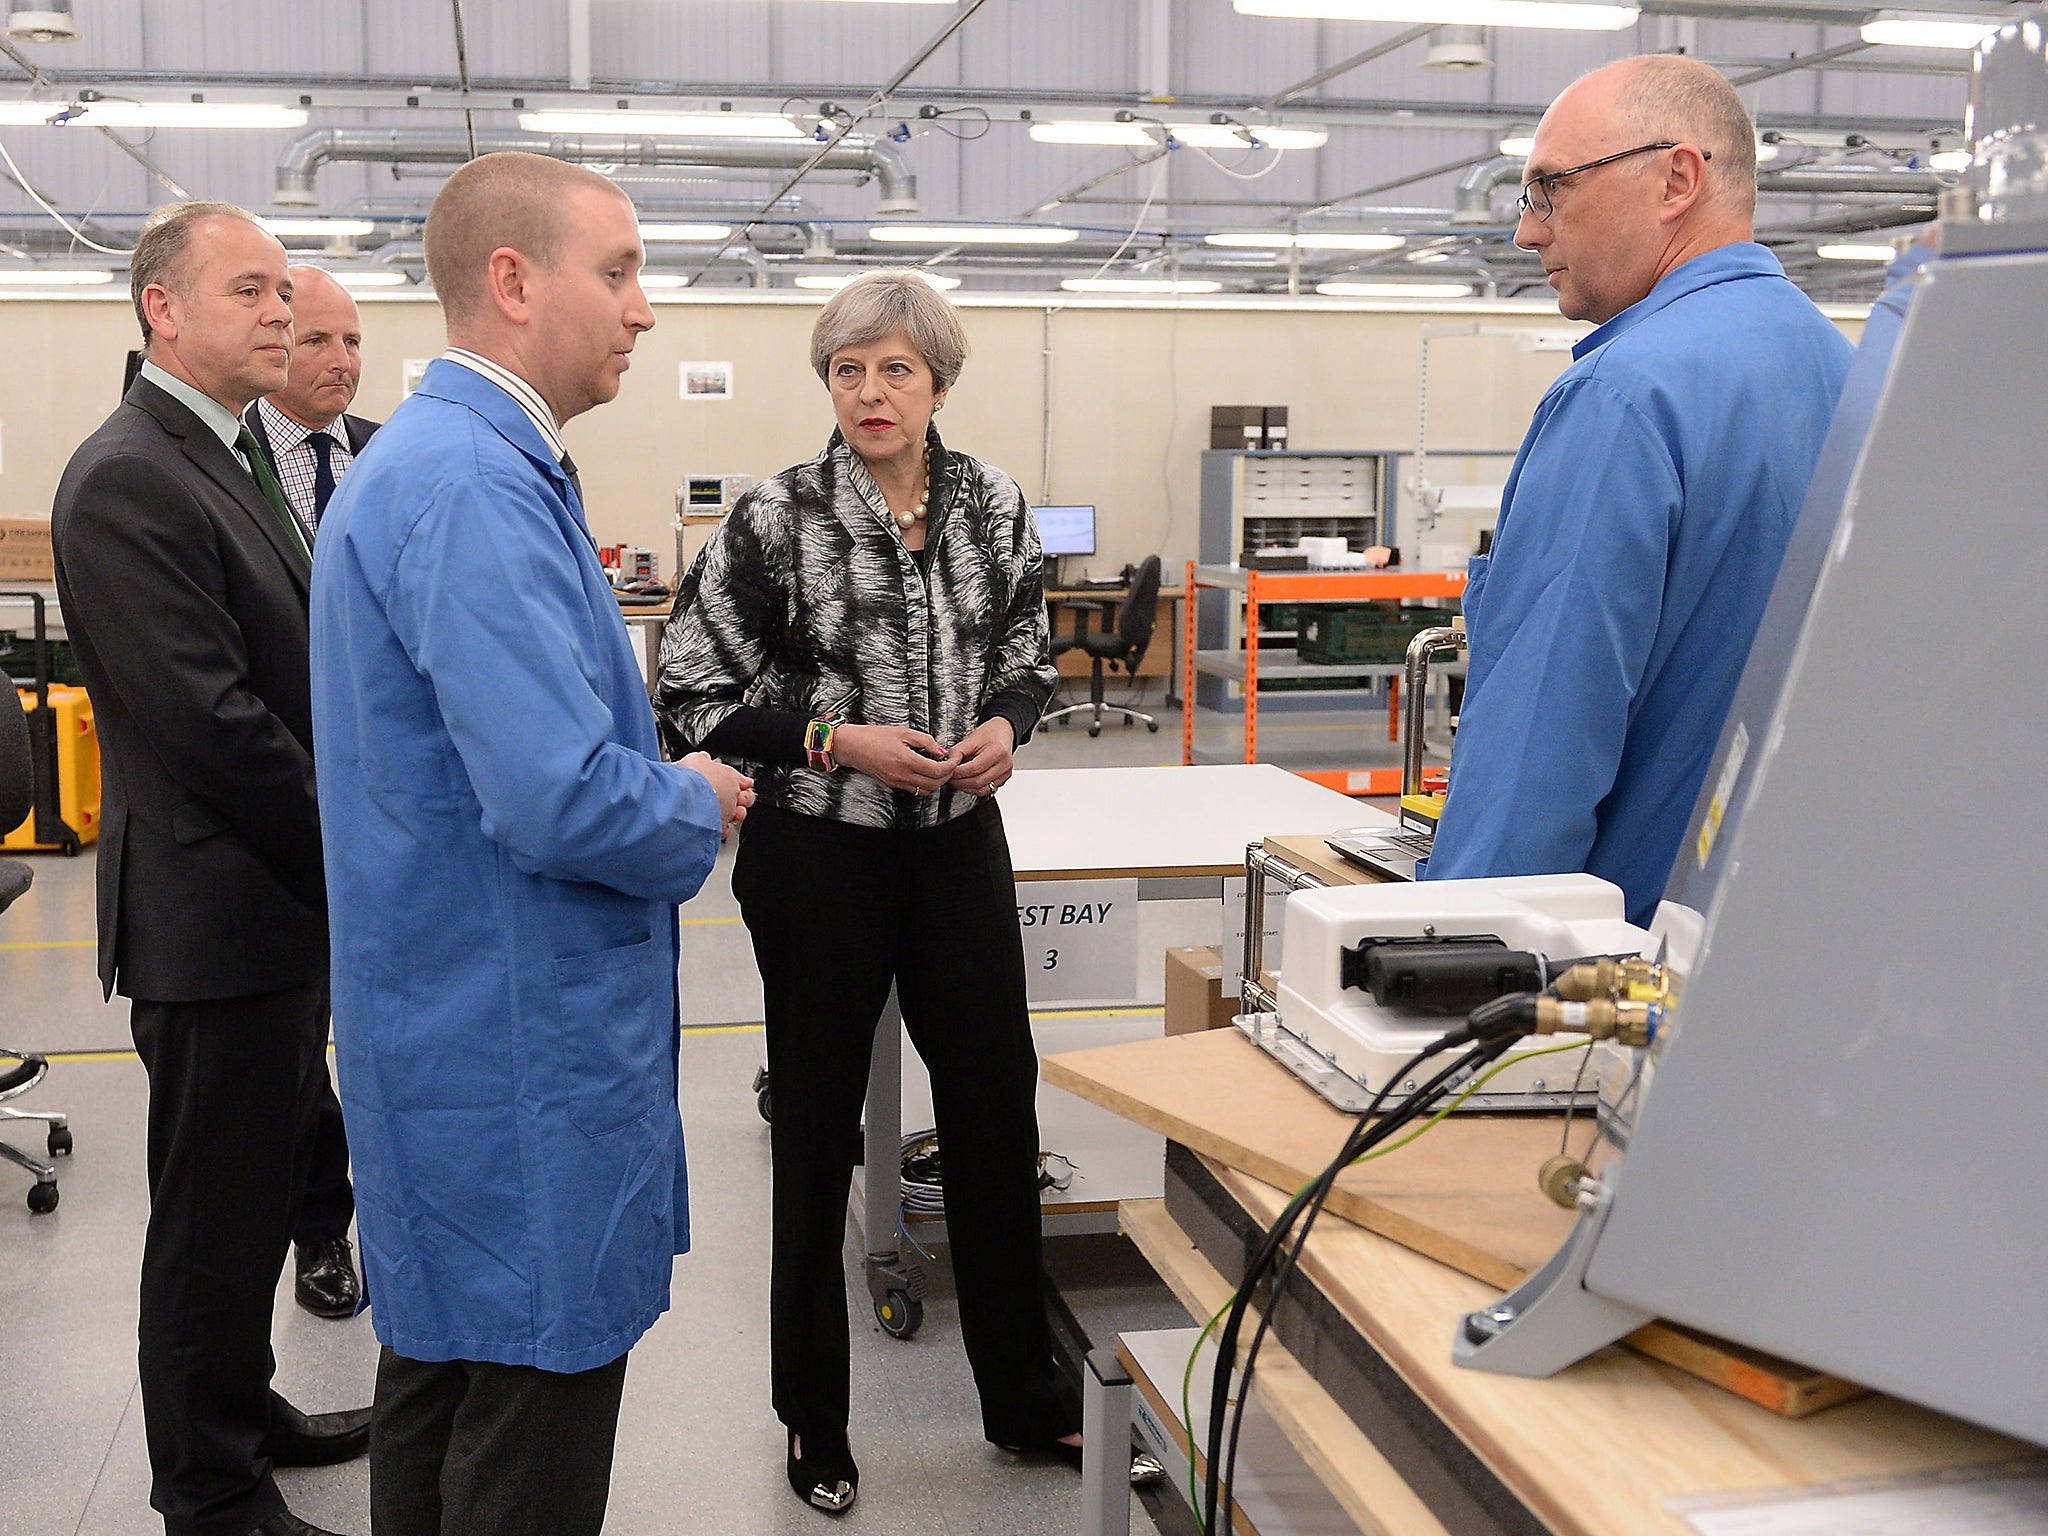 The Prime Minister made the remarks on a visit to a factory in Enfield